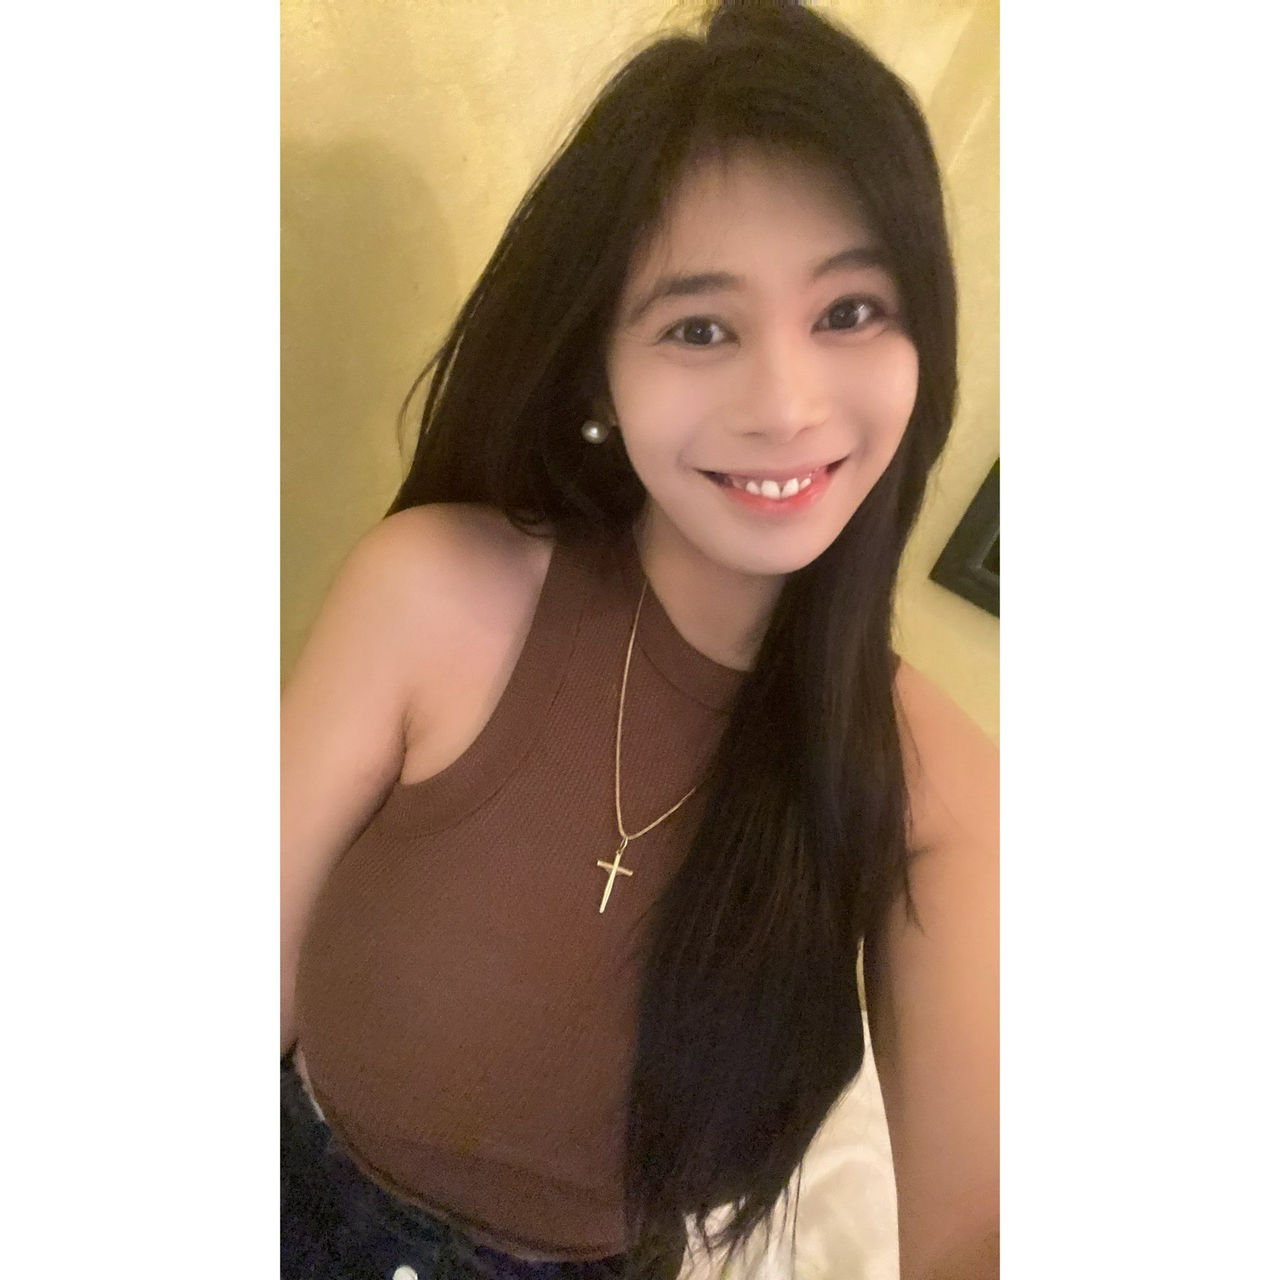 Escorts Manila, Philippines Kathryn Available meet up also Camshow